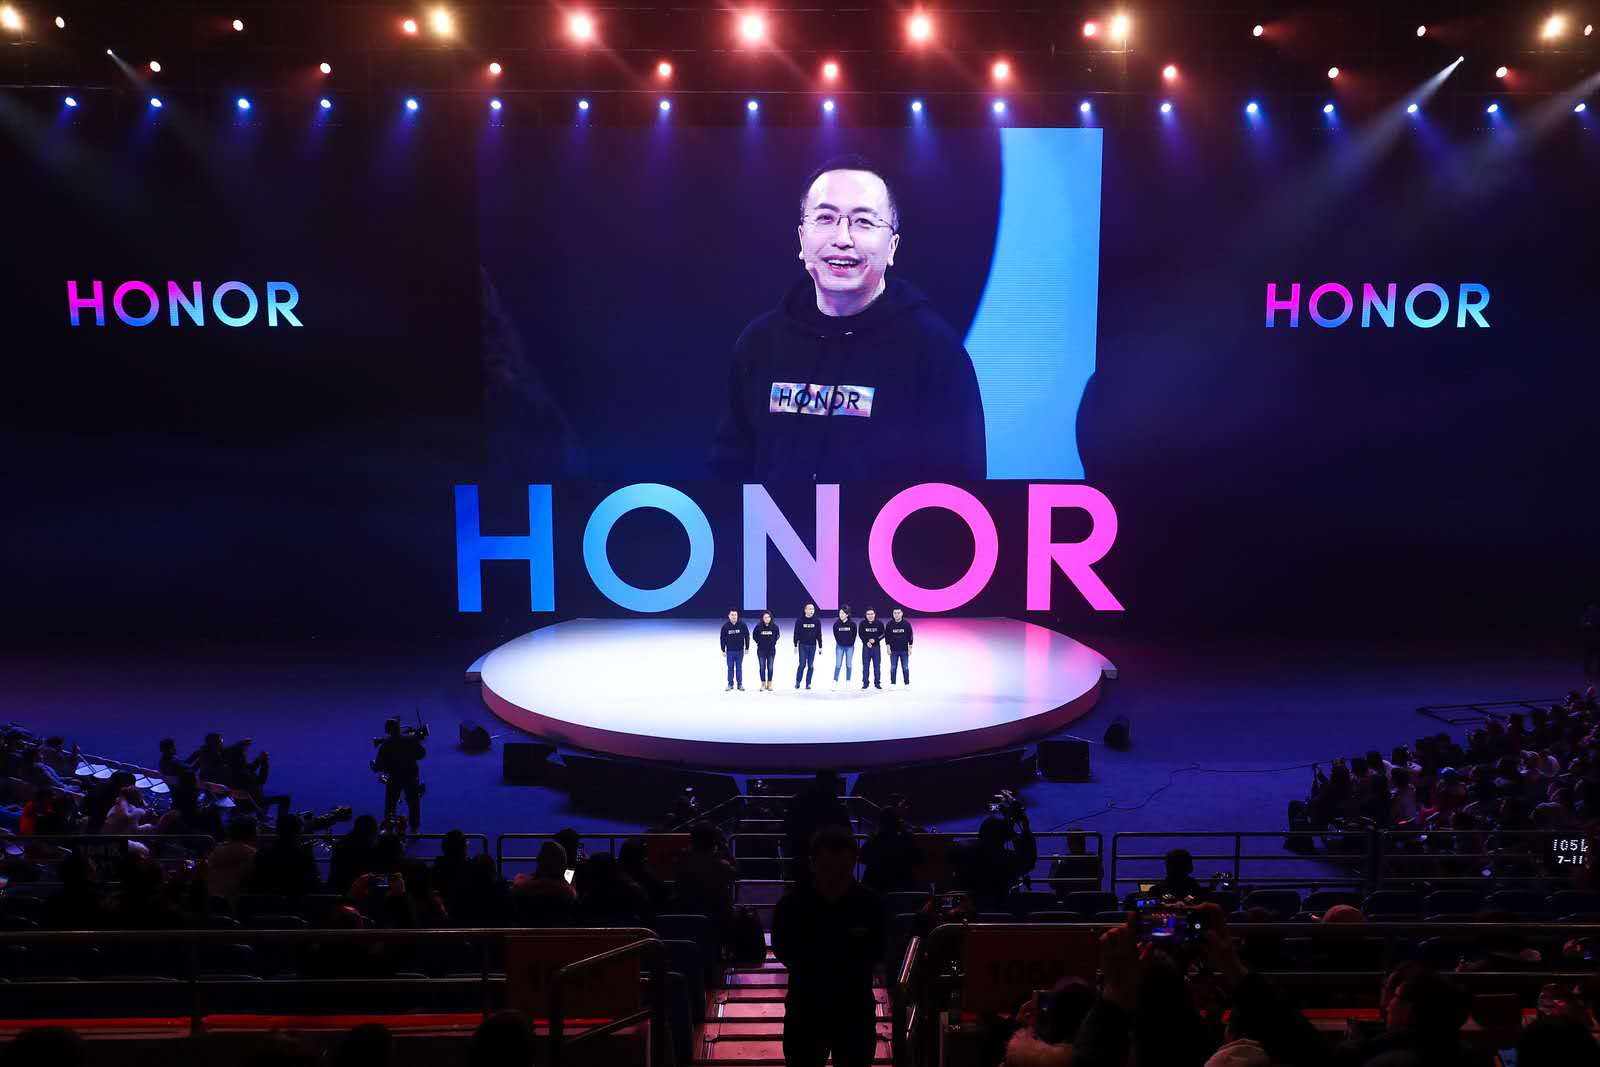 Flagship HONOR View20 To be Launched to Sustain HONOR's Strong Growth